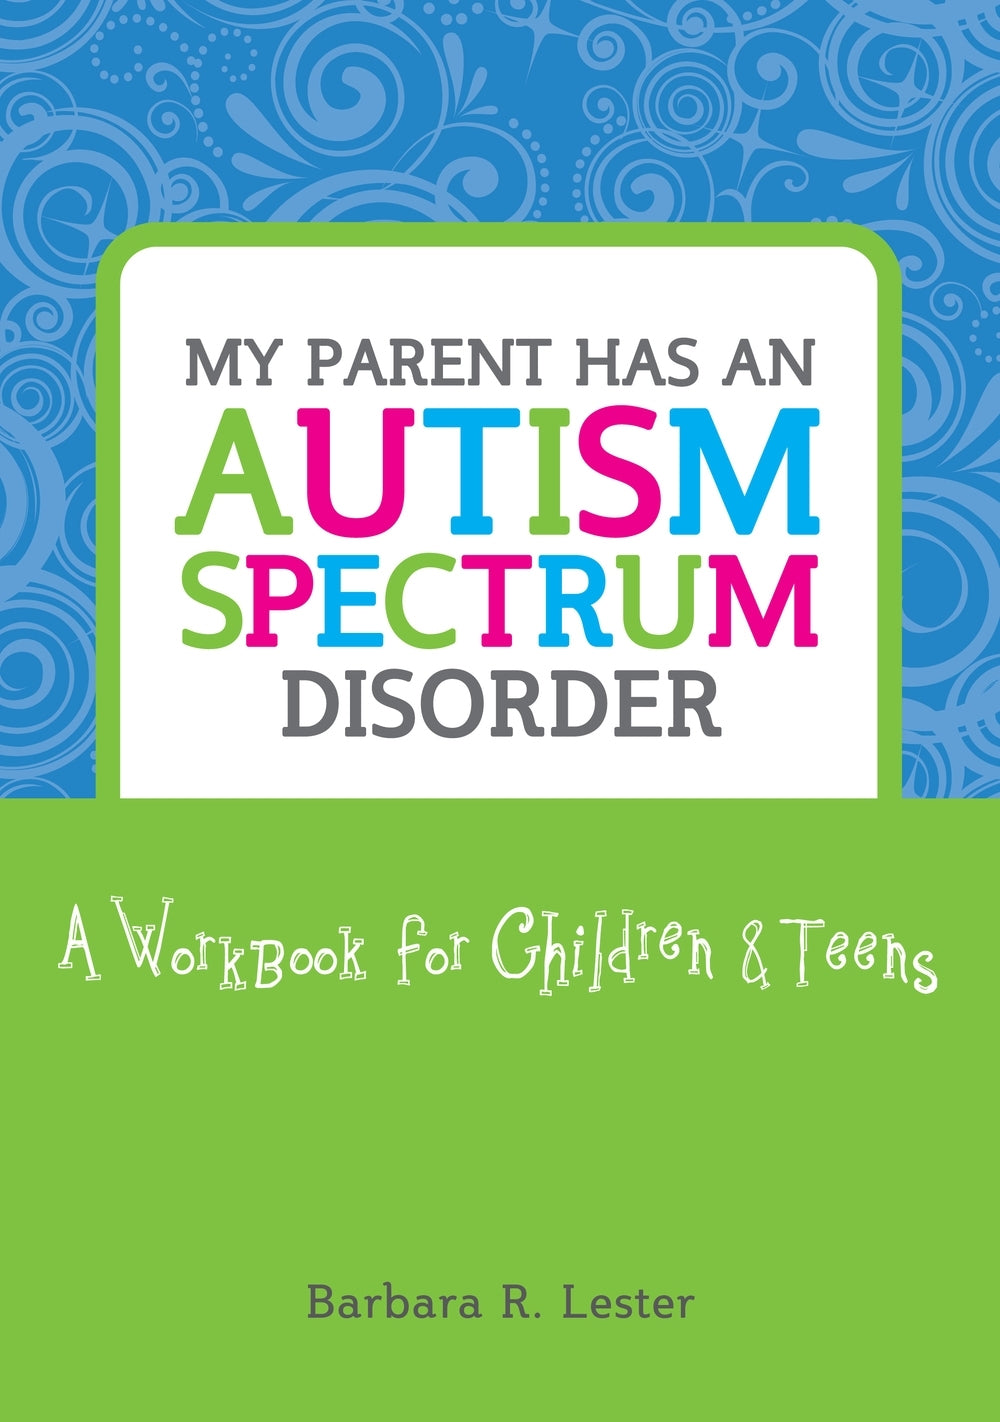 My Parent has an Autism Spectrum Disorder by Barbara Lester